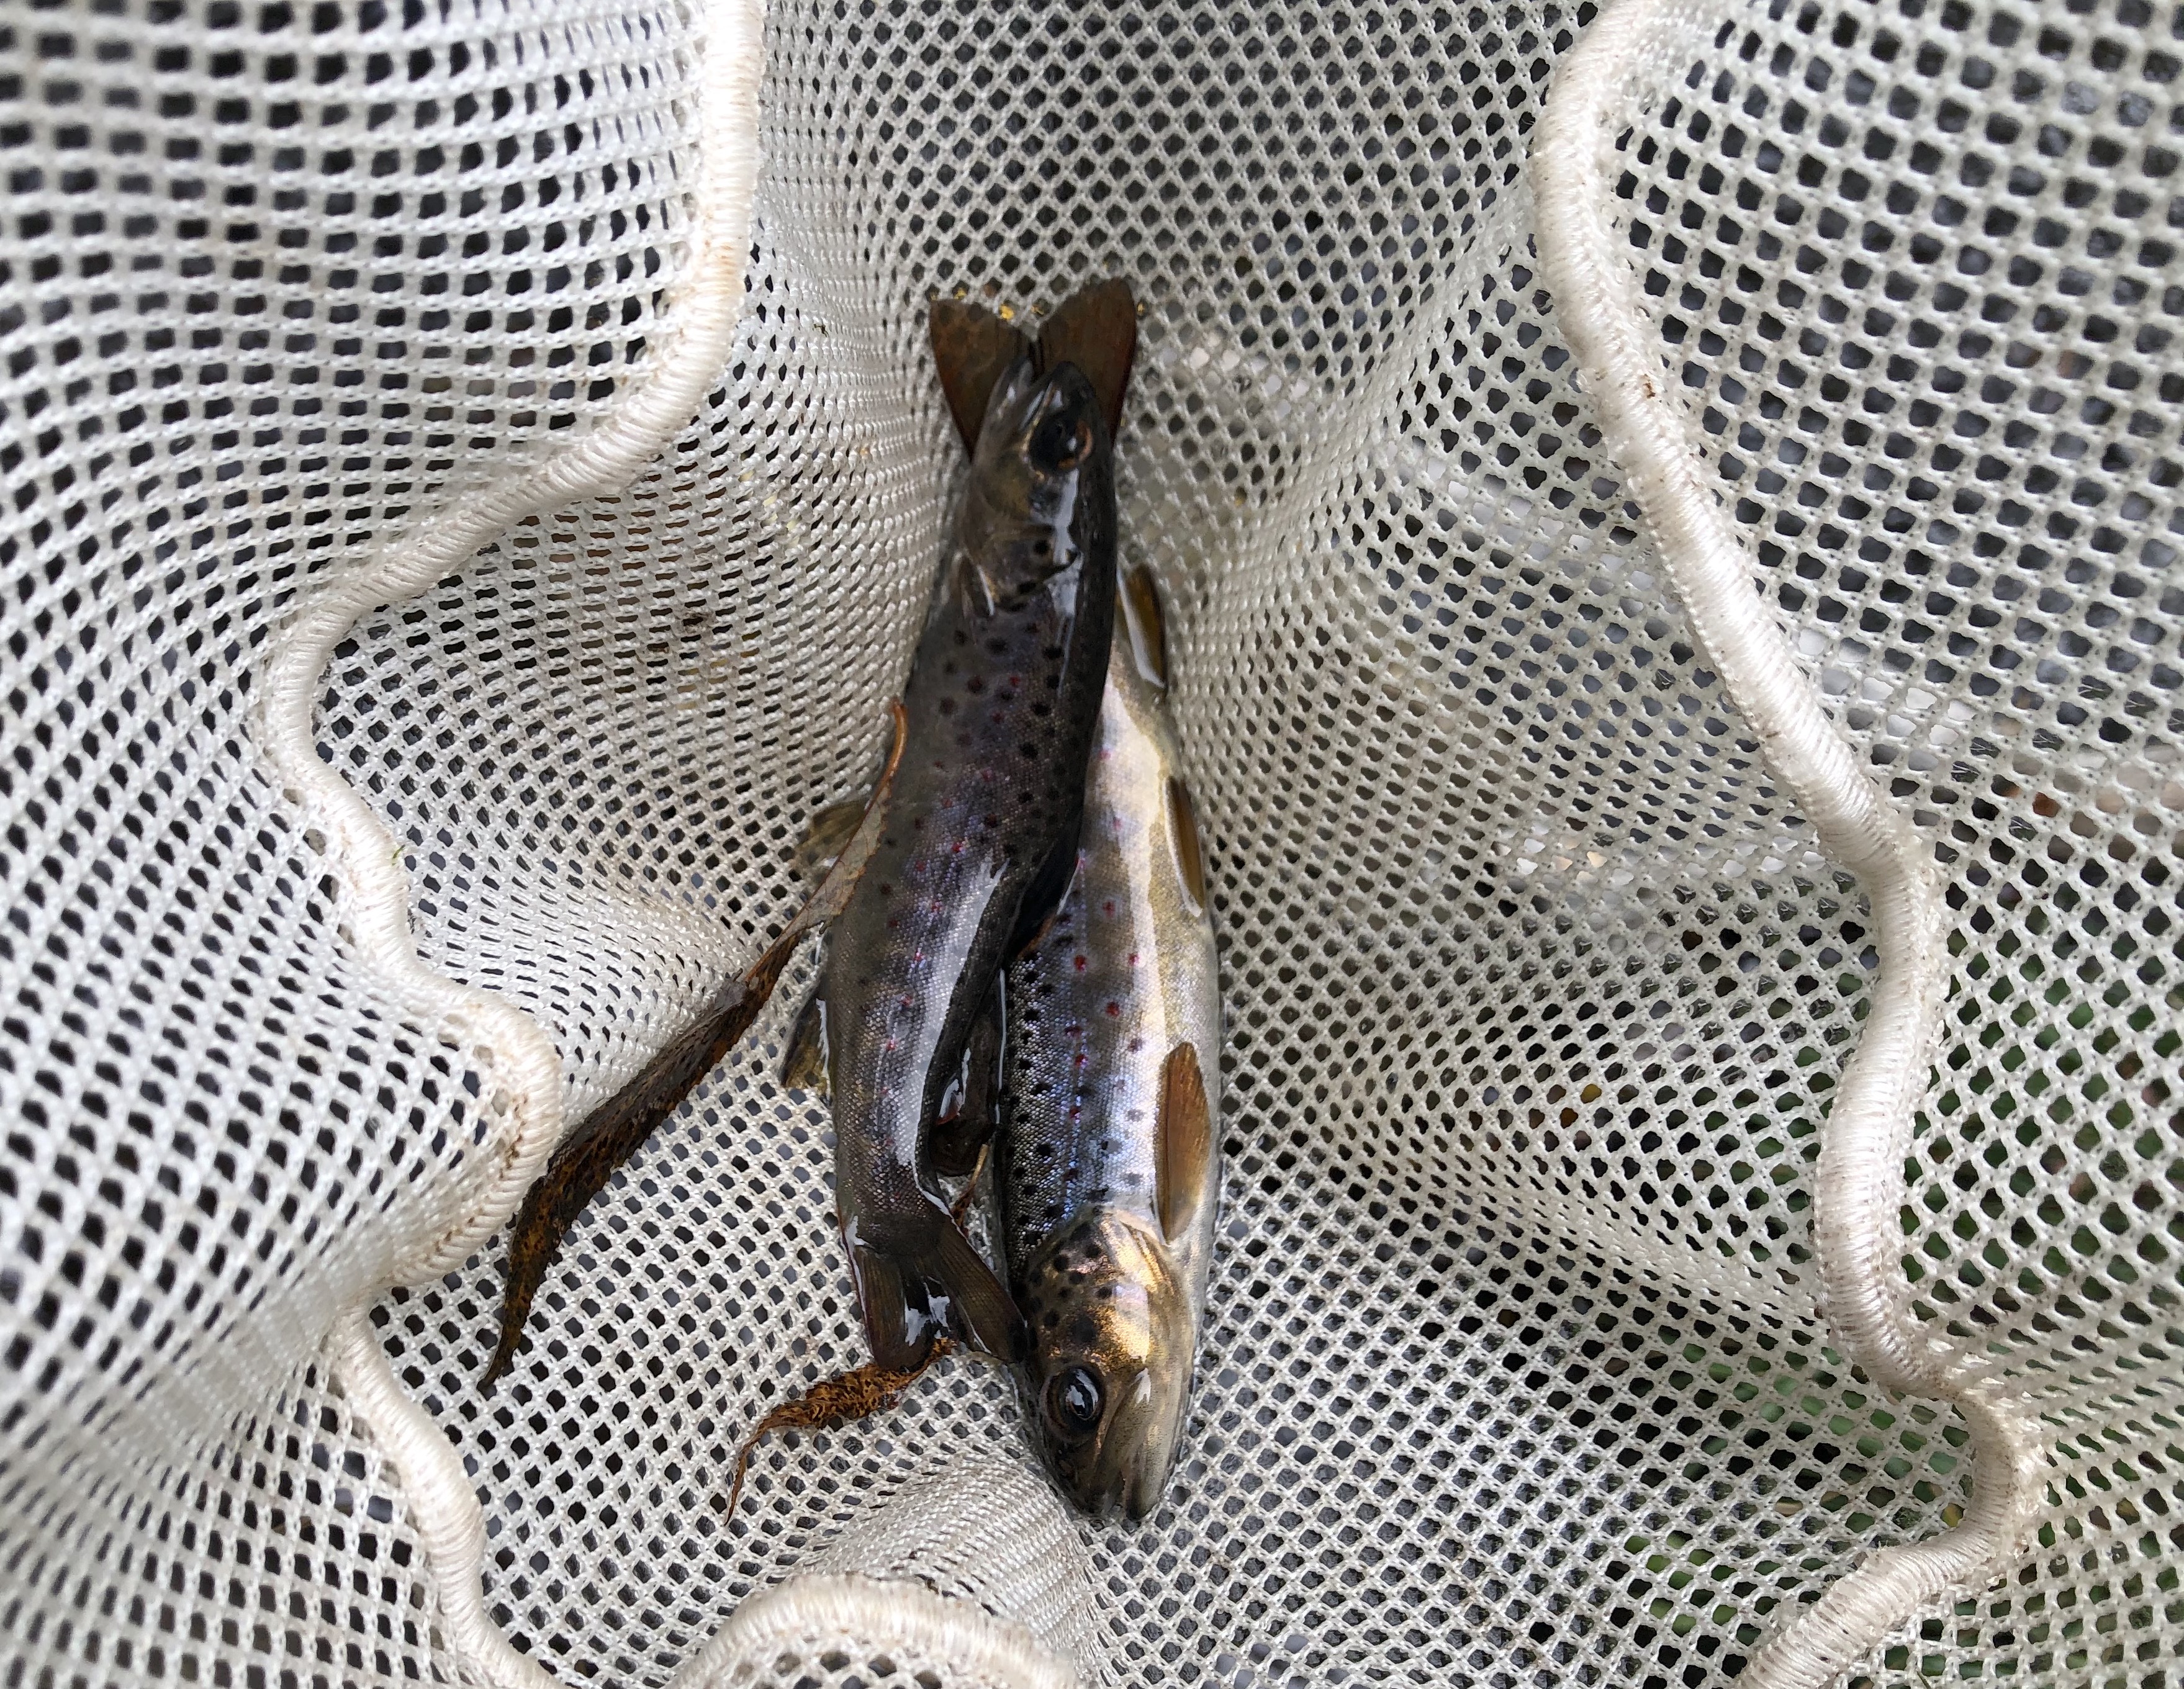 Small trout